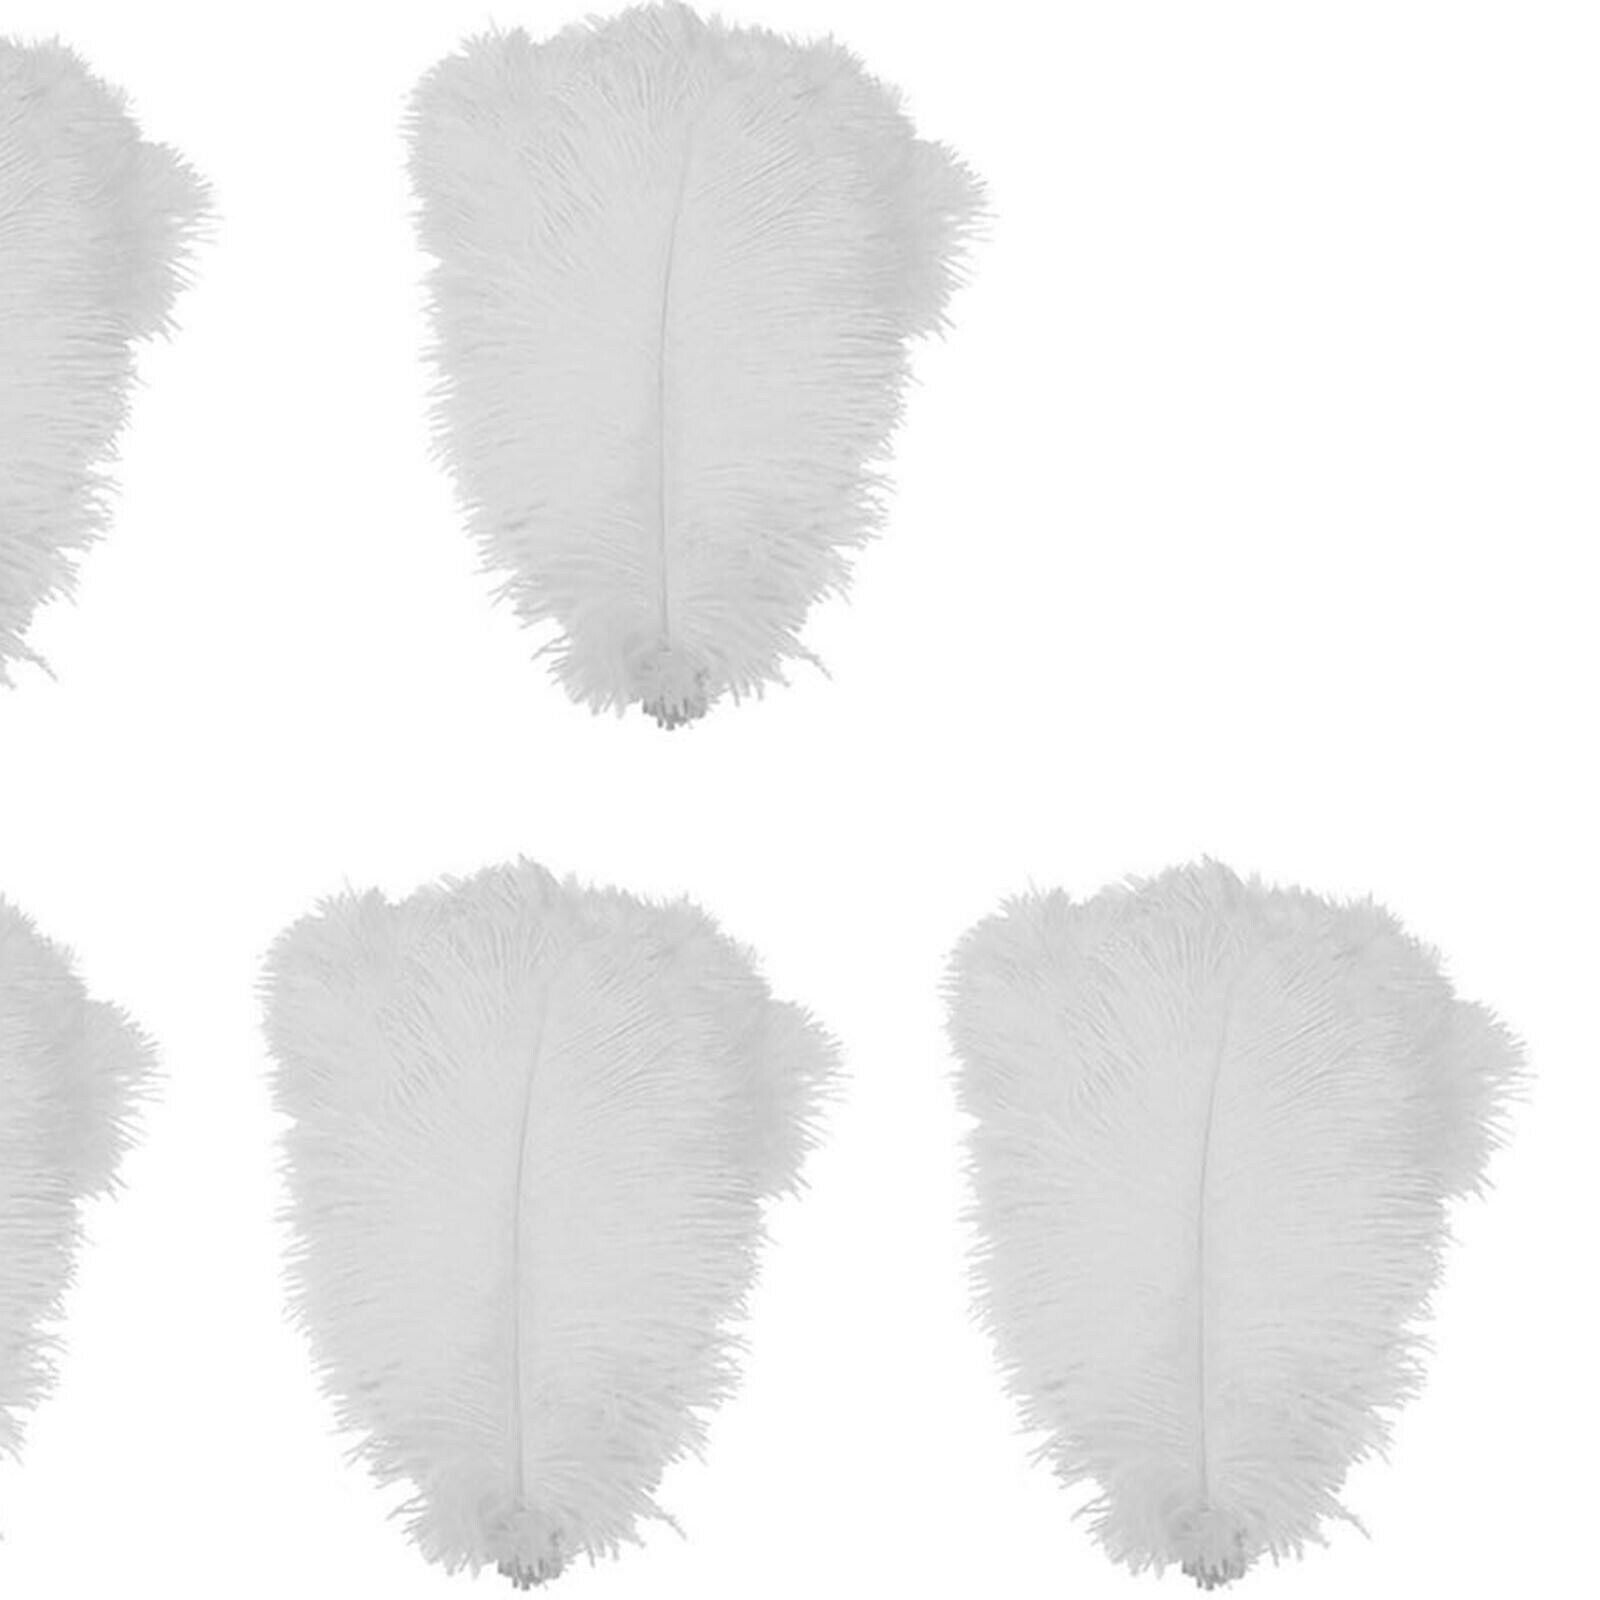 10x Ostrich Feathers 9.8-11.8 inch Decorations Home White #Natural for Party